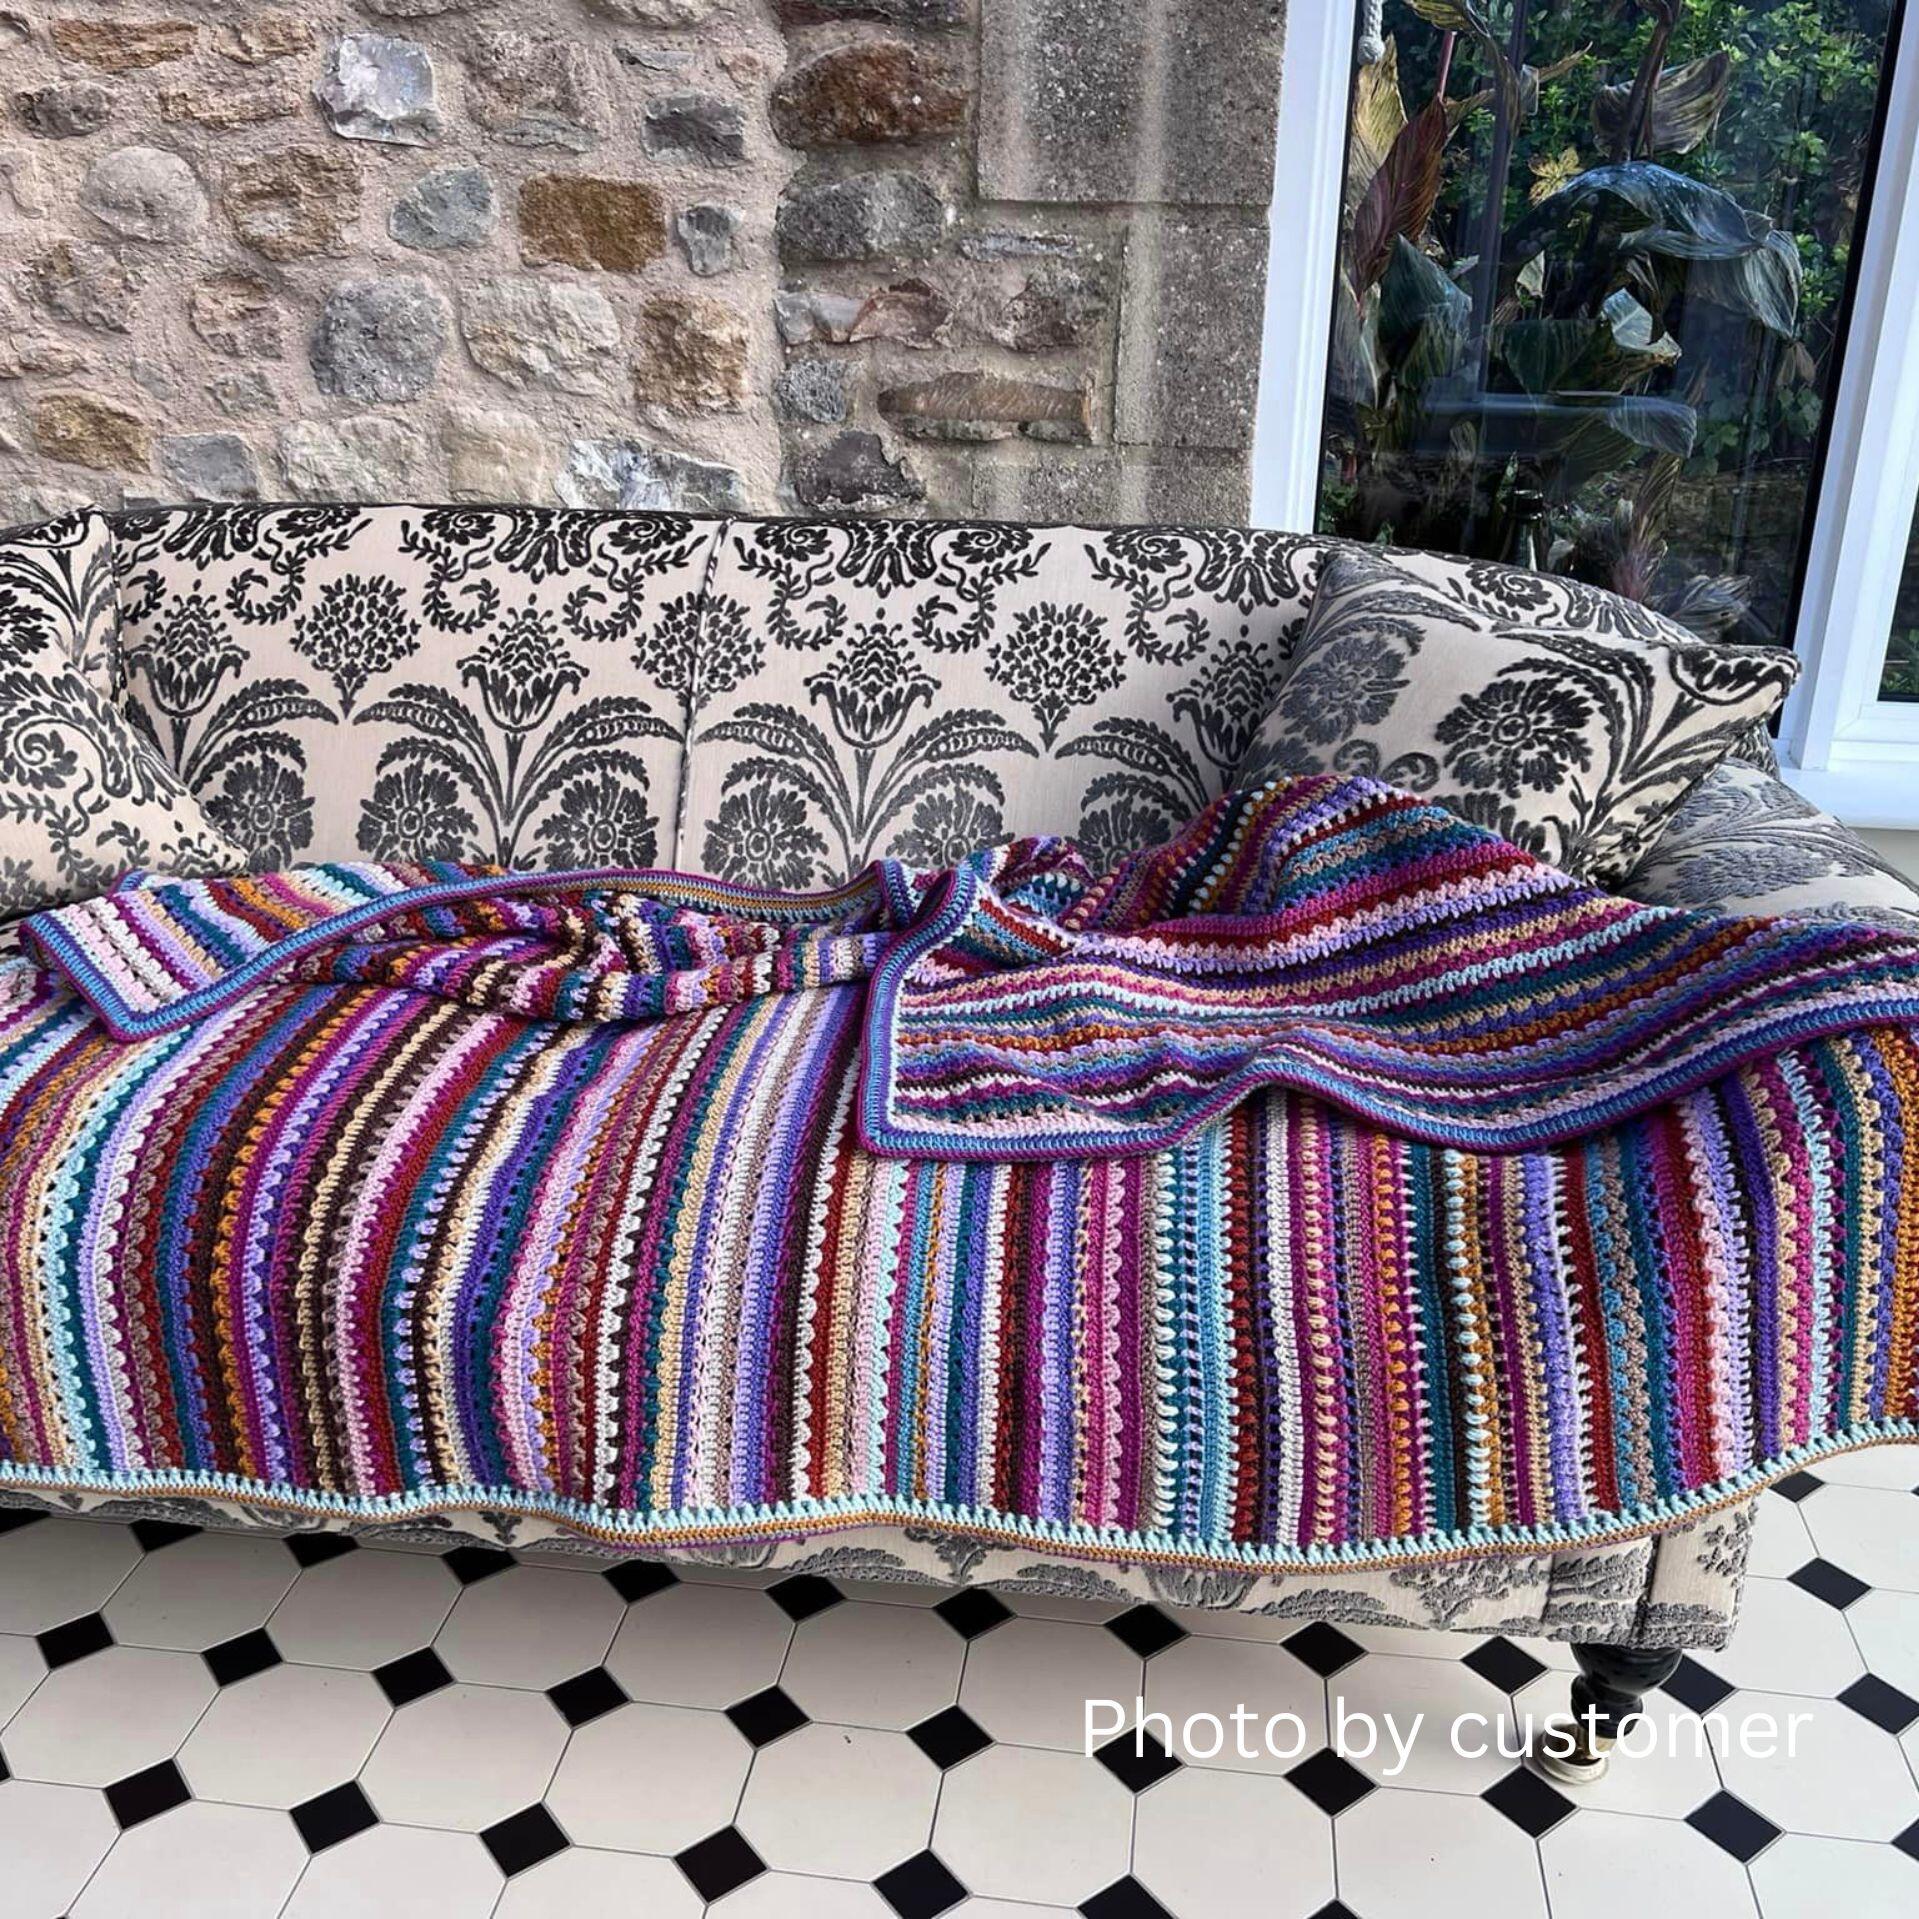 Greenway blanket made by customer